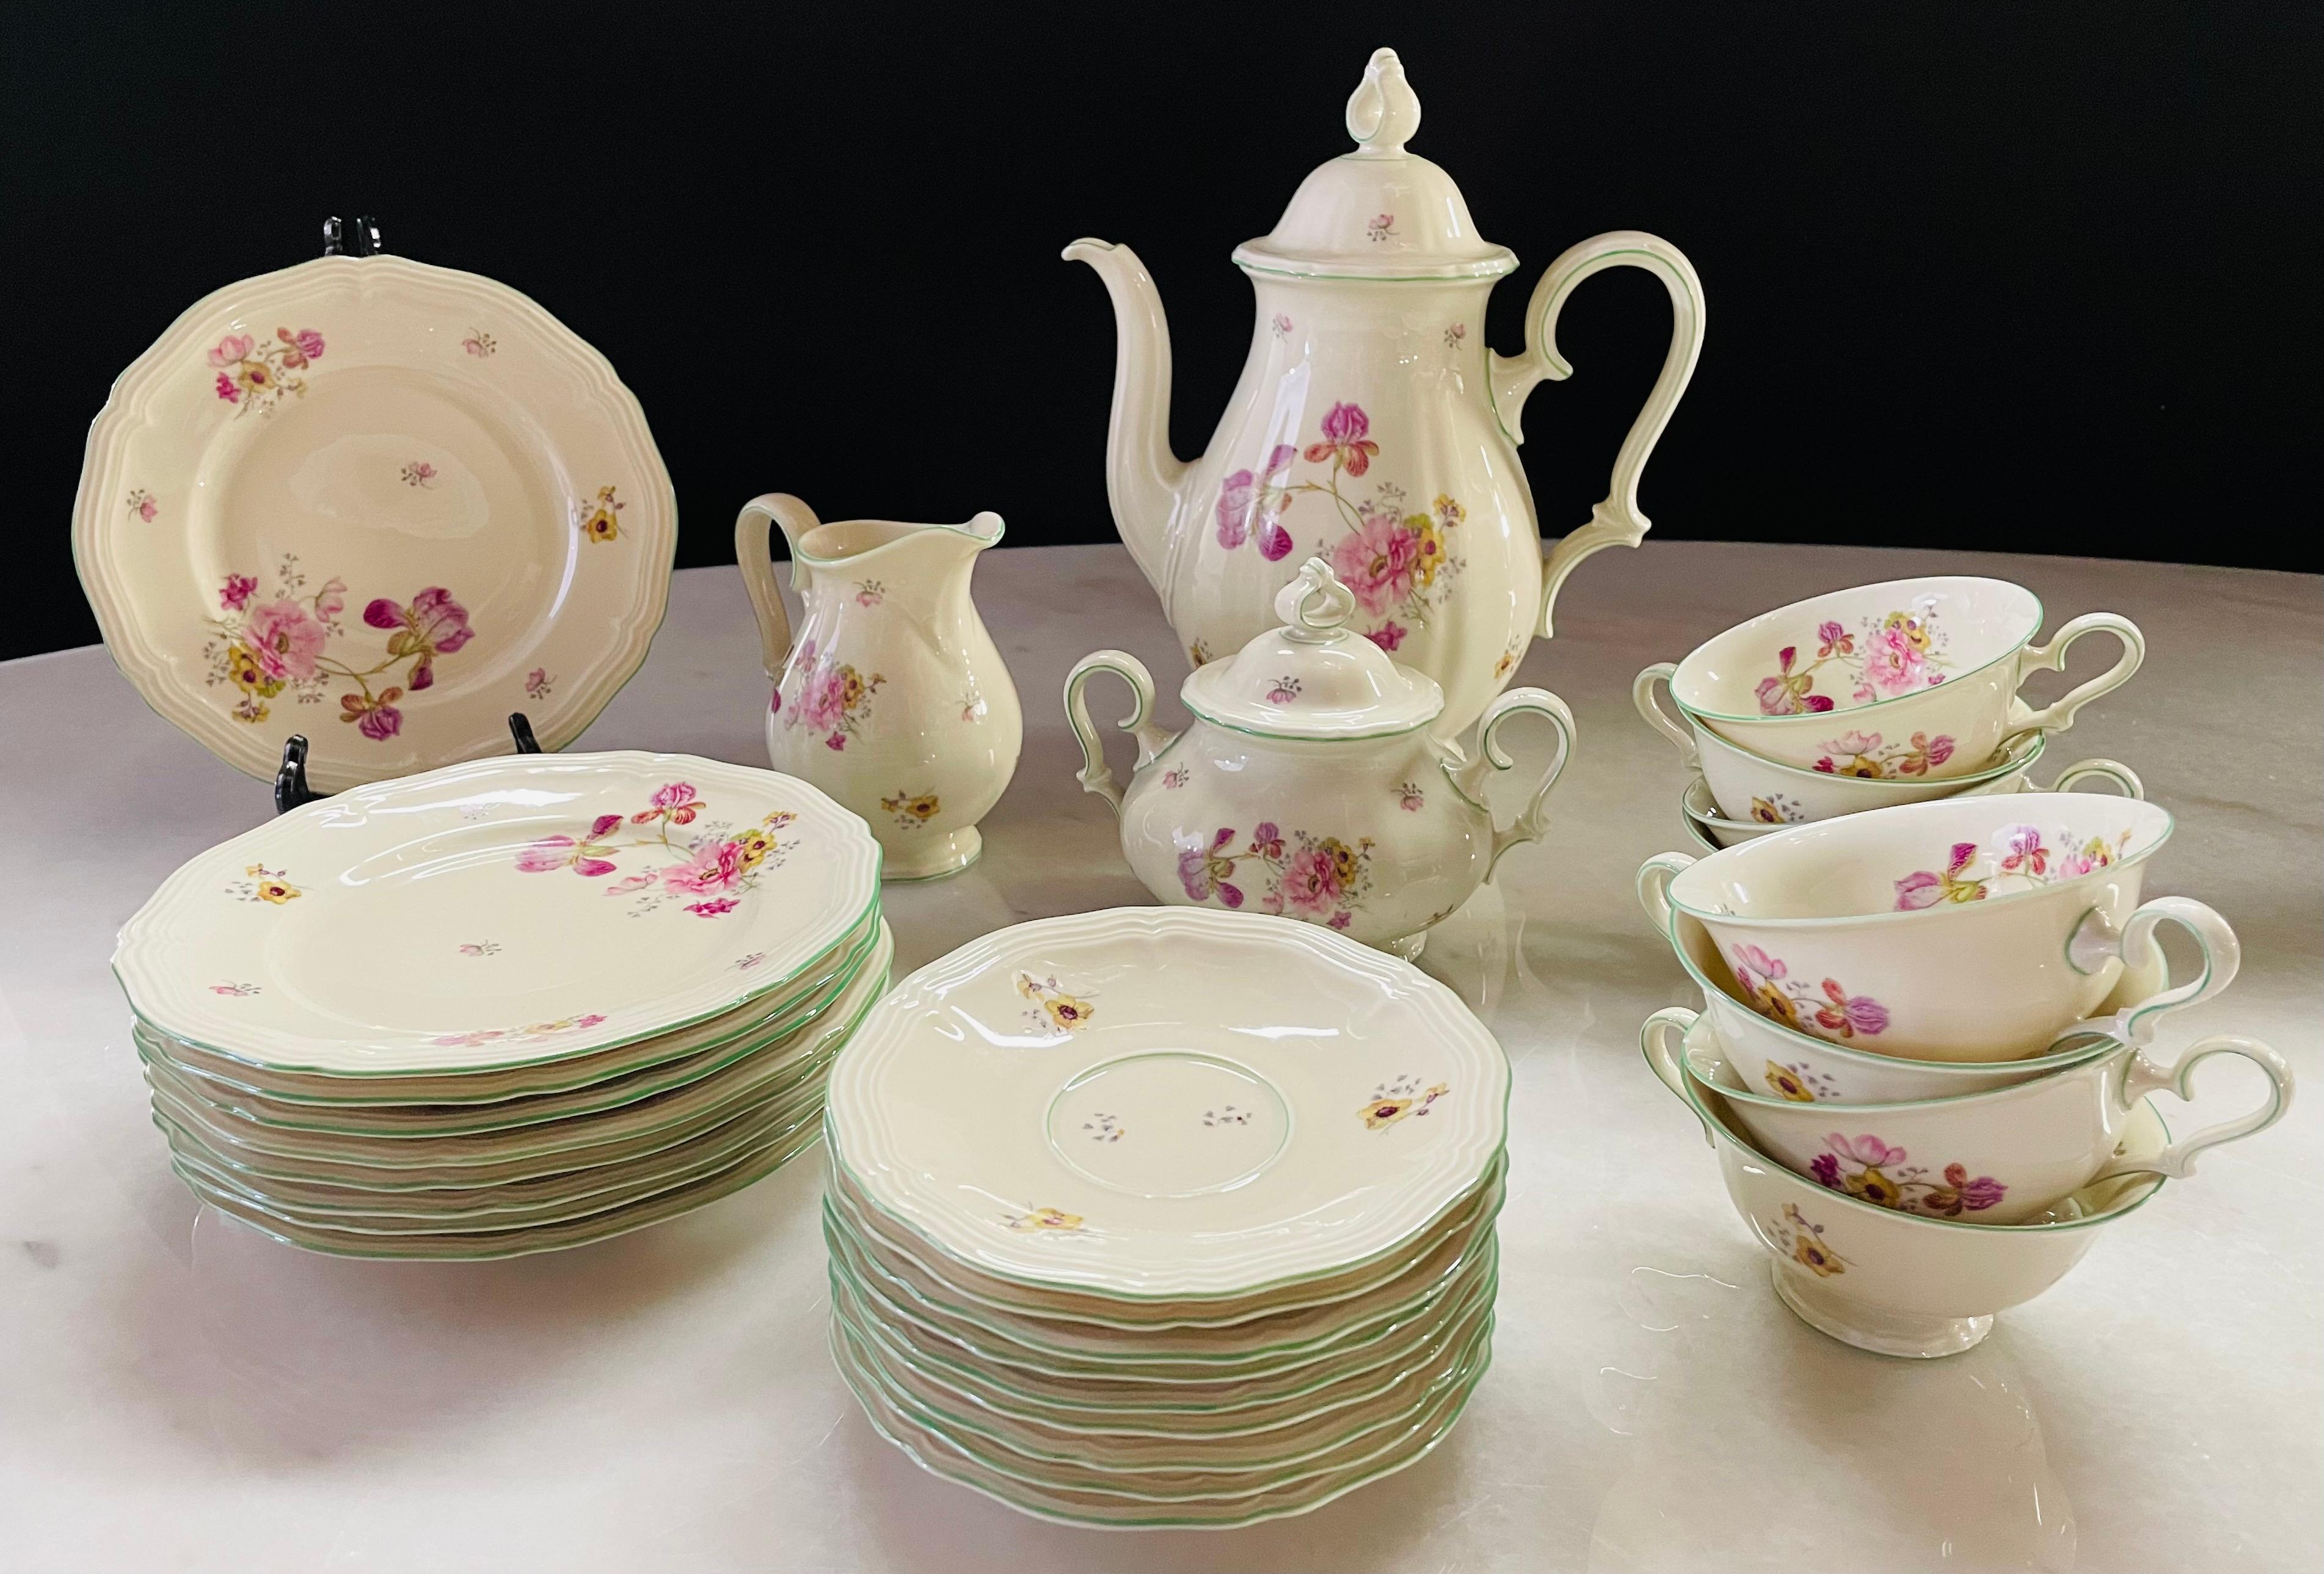 A charming antique Rosenthal coffee or tea set of 29 pieces made in Bahnof Selb, Germany circa 1930's. Each piece features floral decor on white porcelain believed to be inspired by the walls in Sanssouci, the summer palace of Frederick the Great,